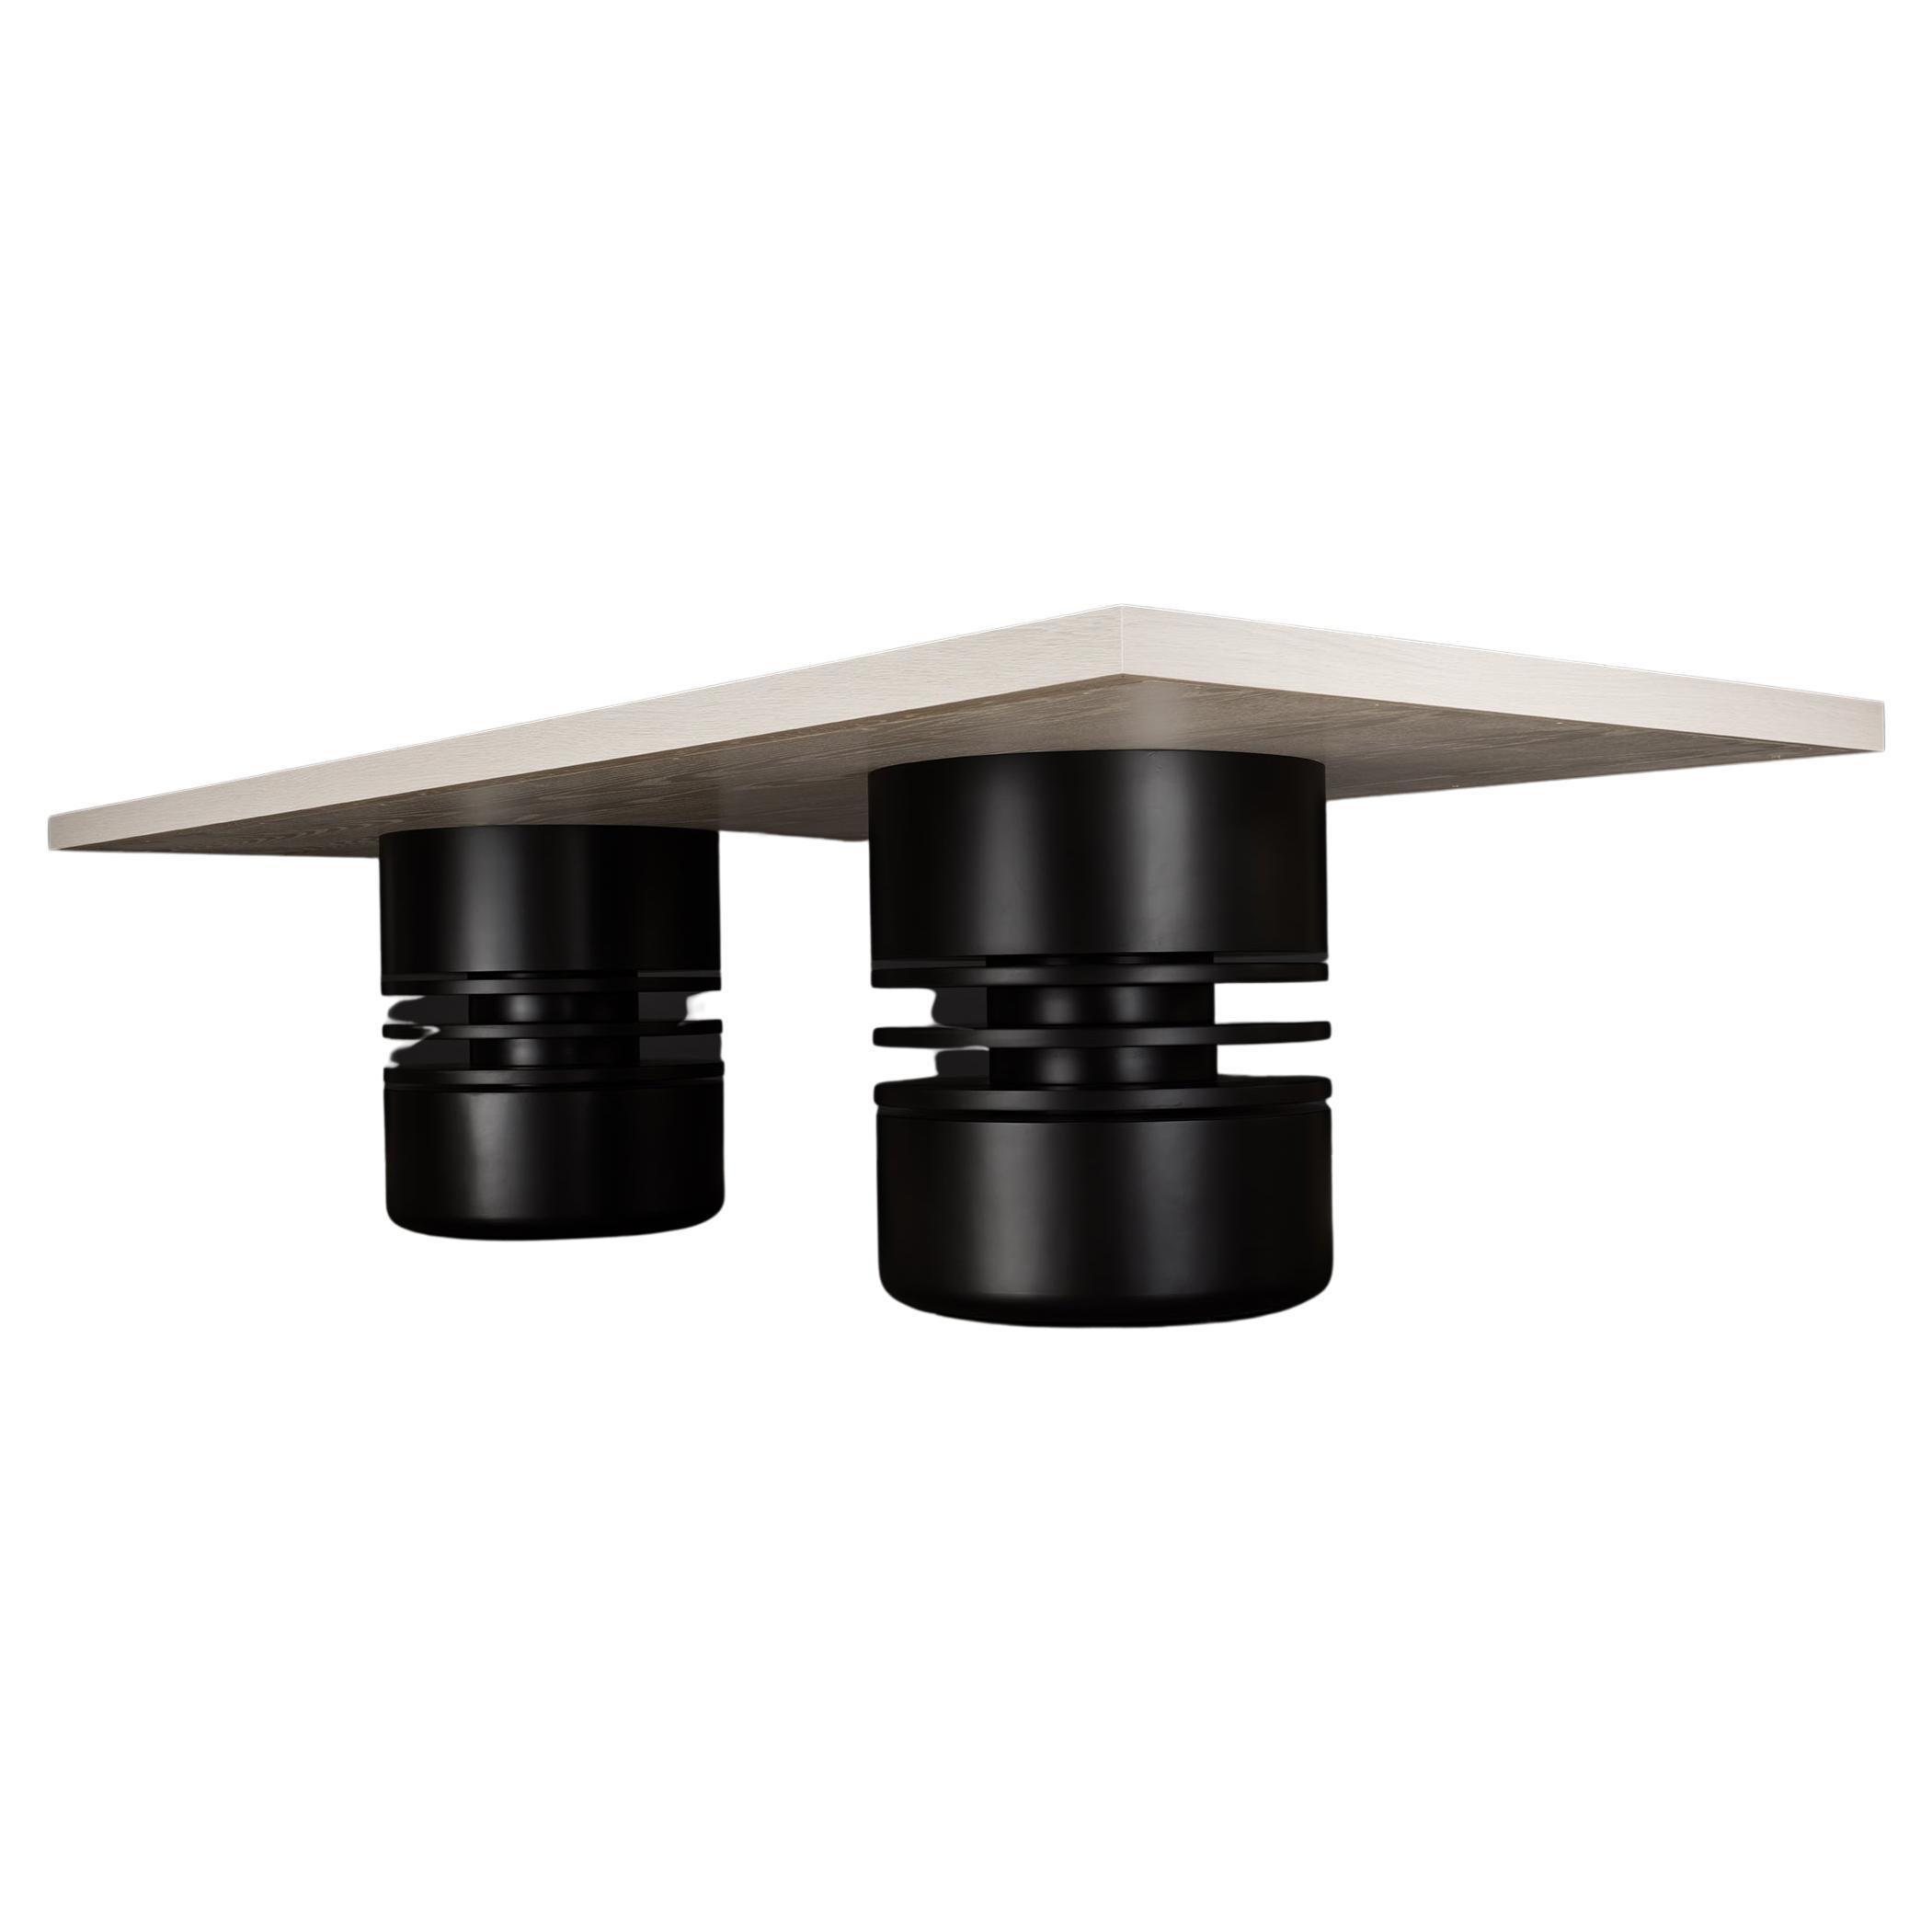 BOLSA DINING TABLE - Modern Design in Pacific Rift Oak with Matte Black Lacquer  For Sale